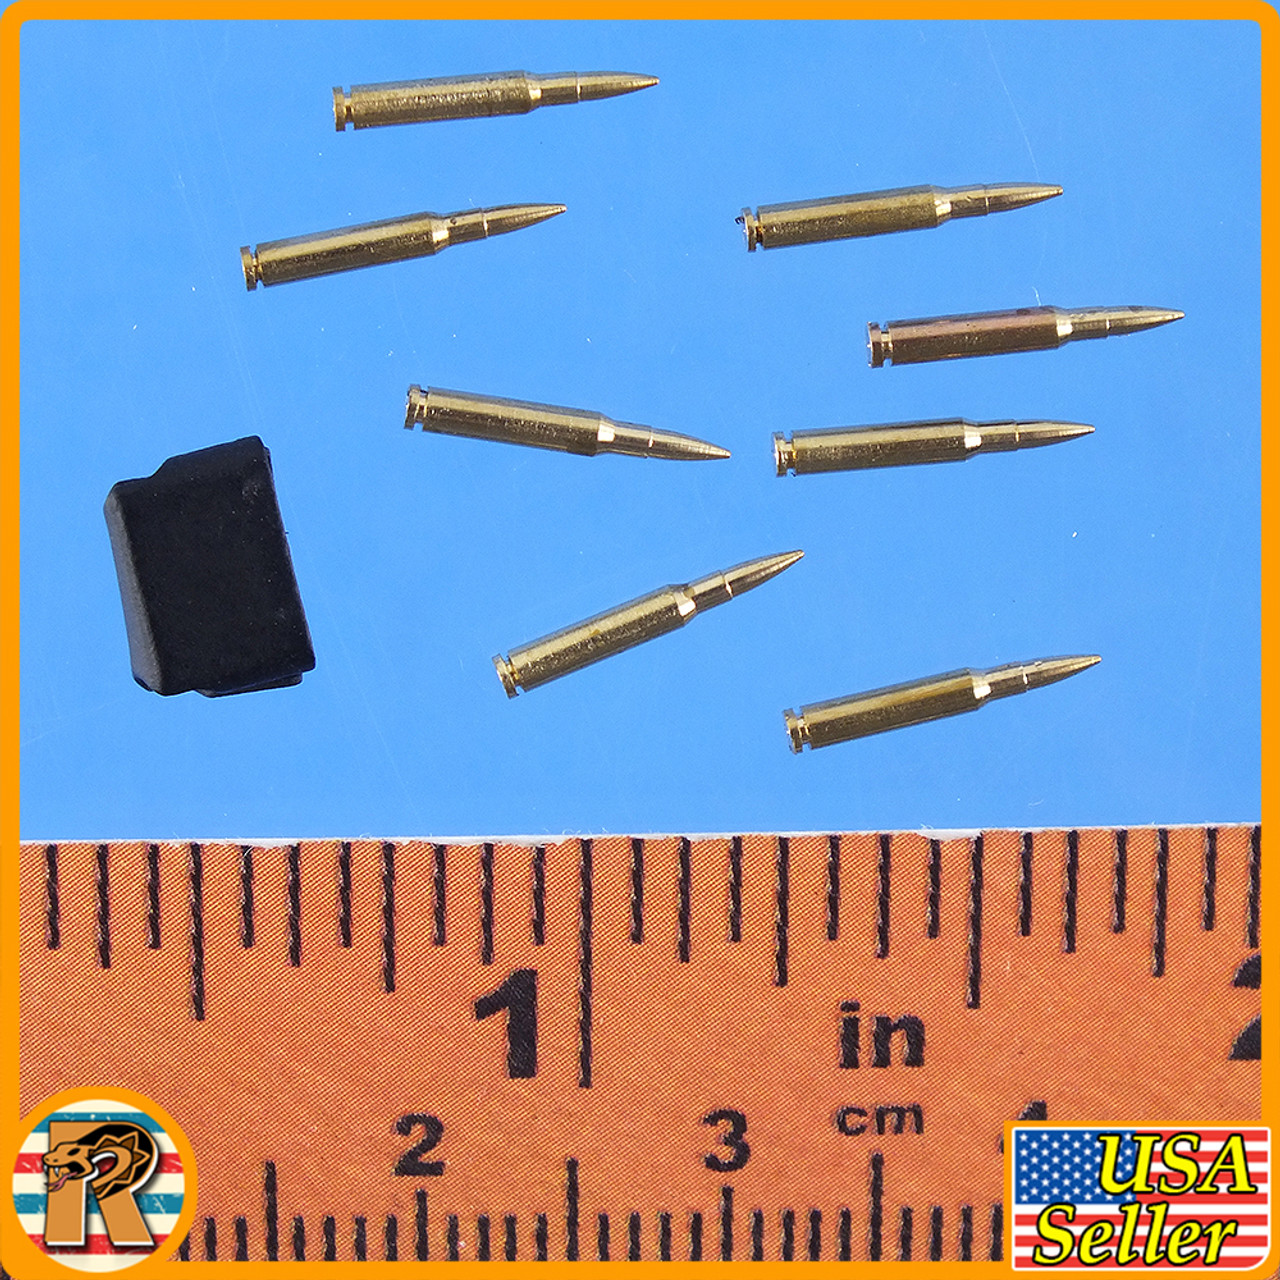 Ryan 101st Airborne - Bullets x8 & Clip (Metal) - 1/6 Scale -